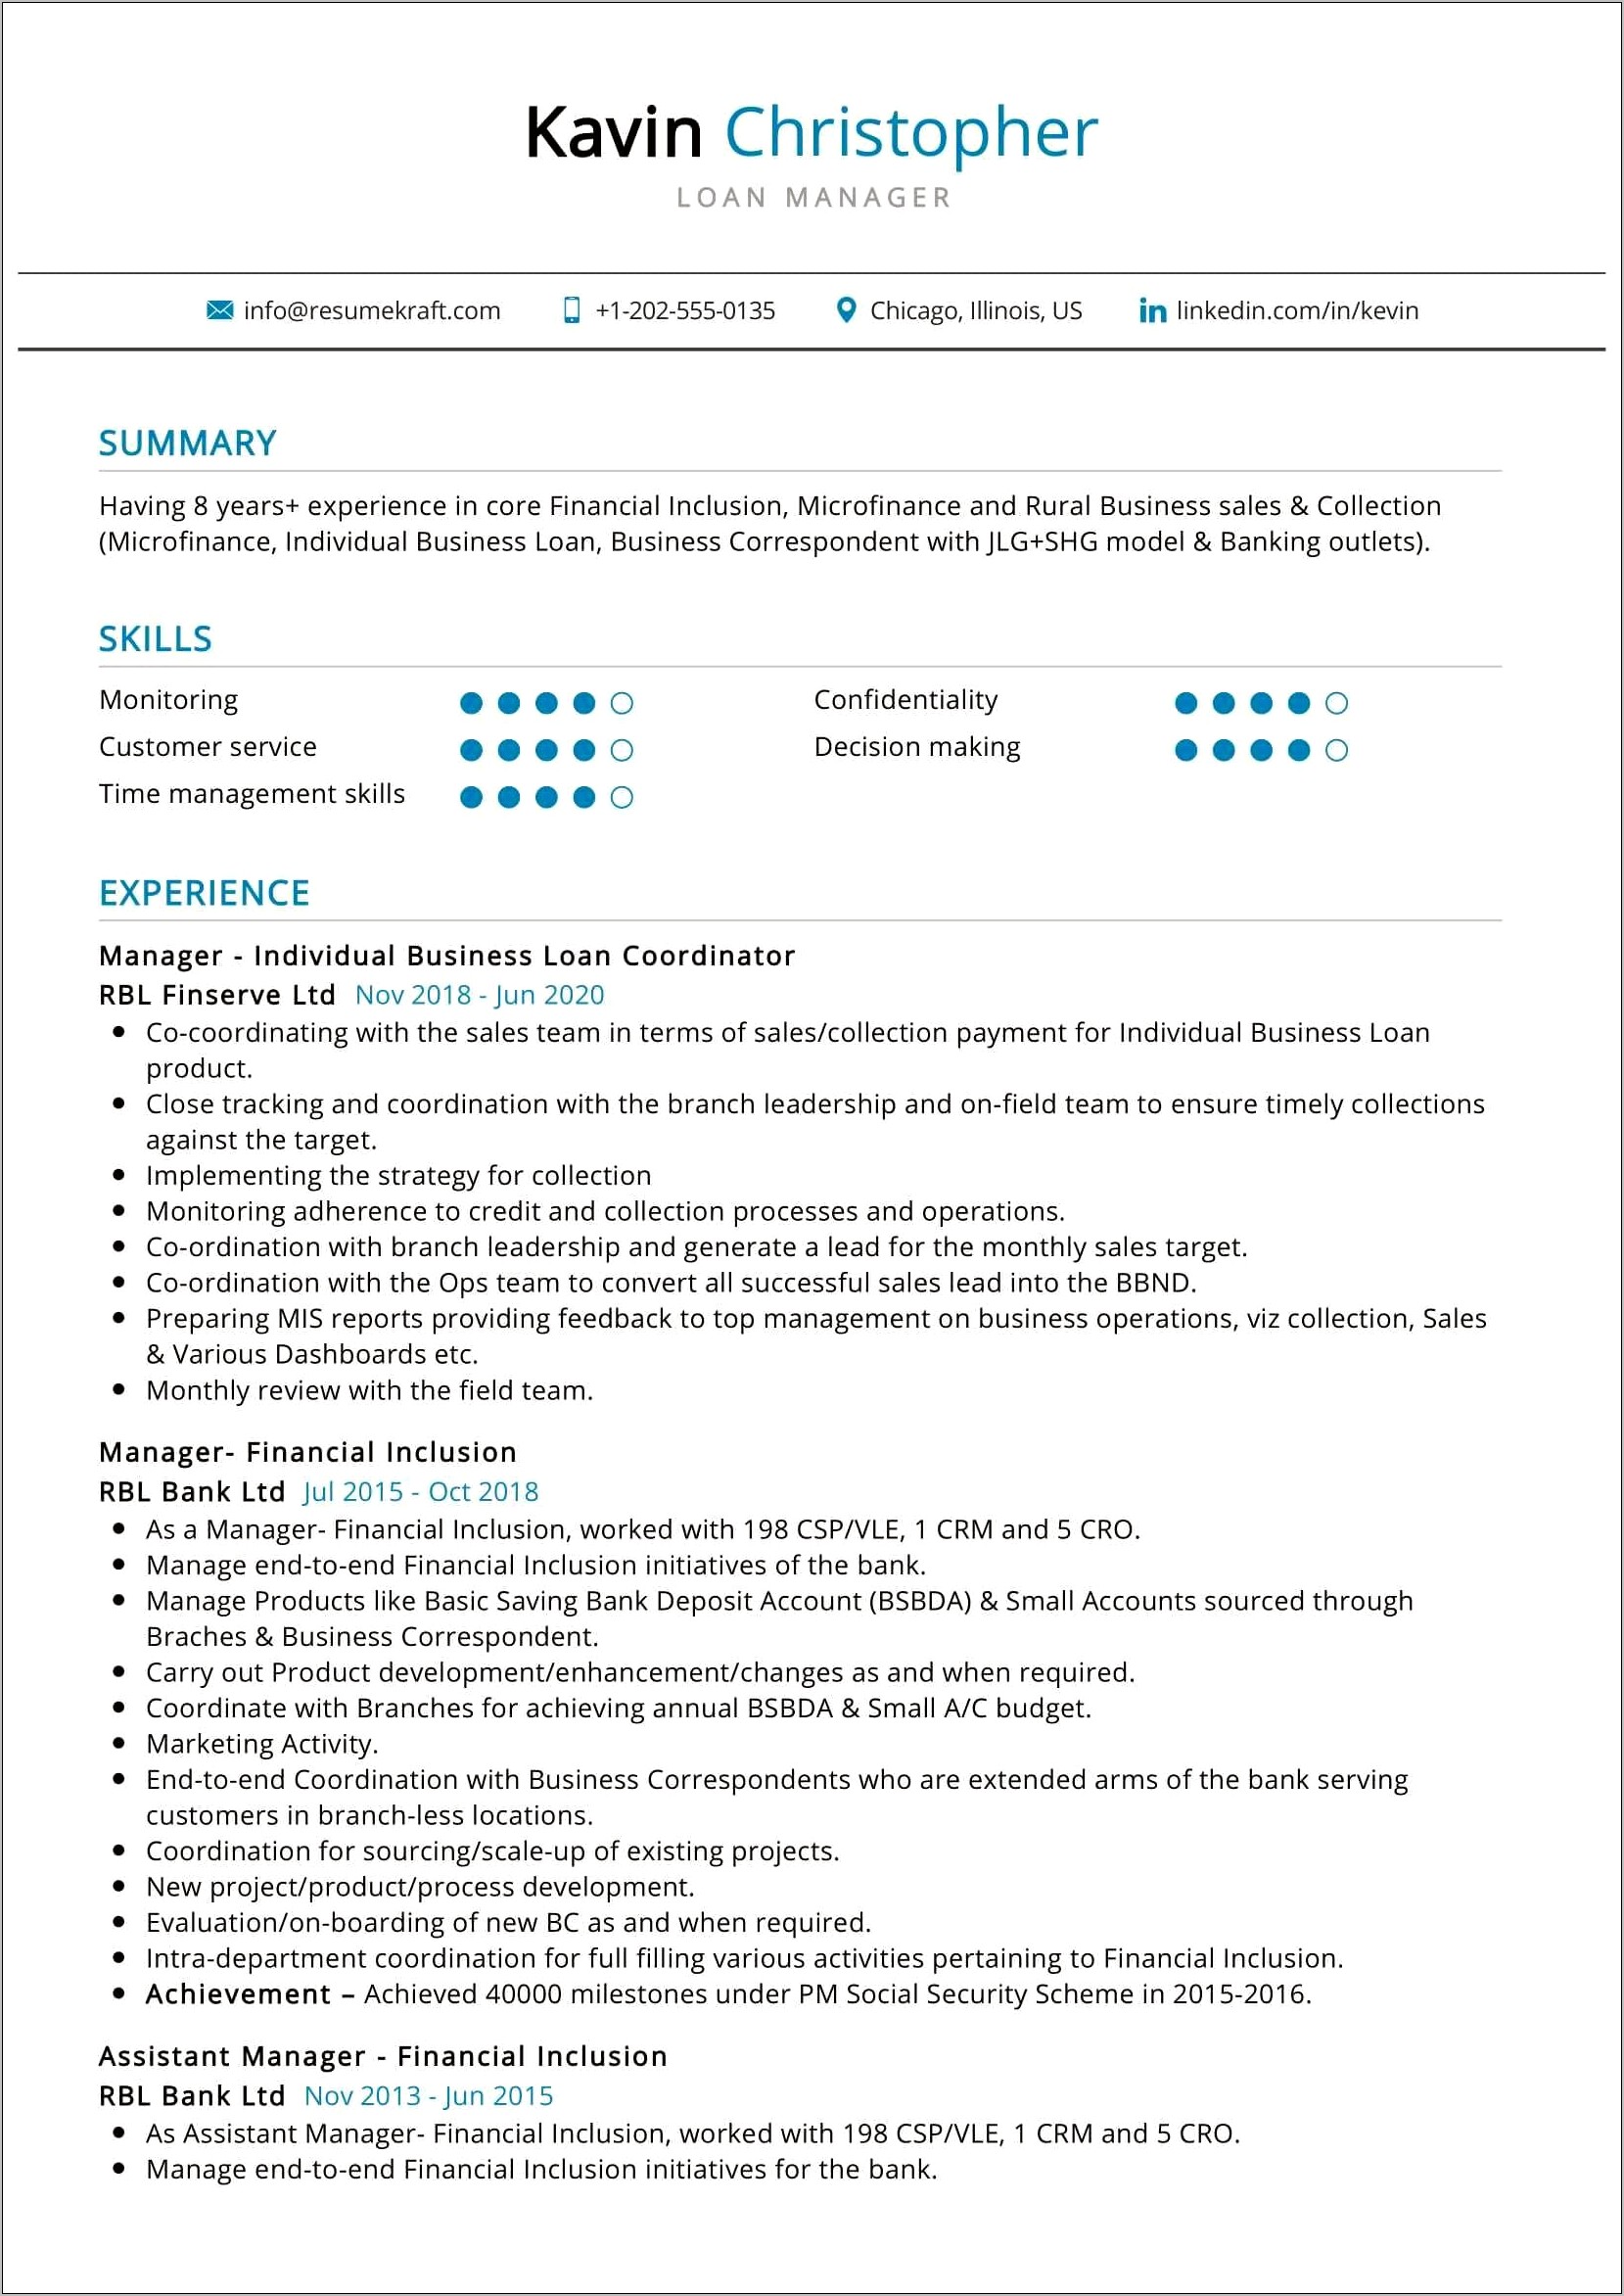 Financial Operations Specialist Resume Sample